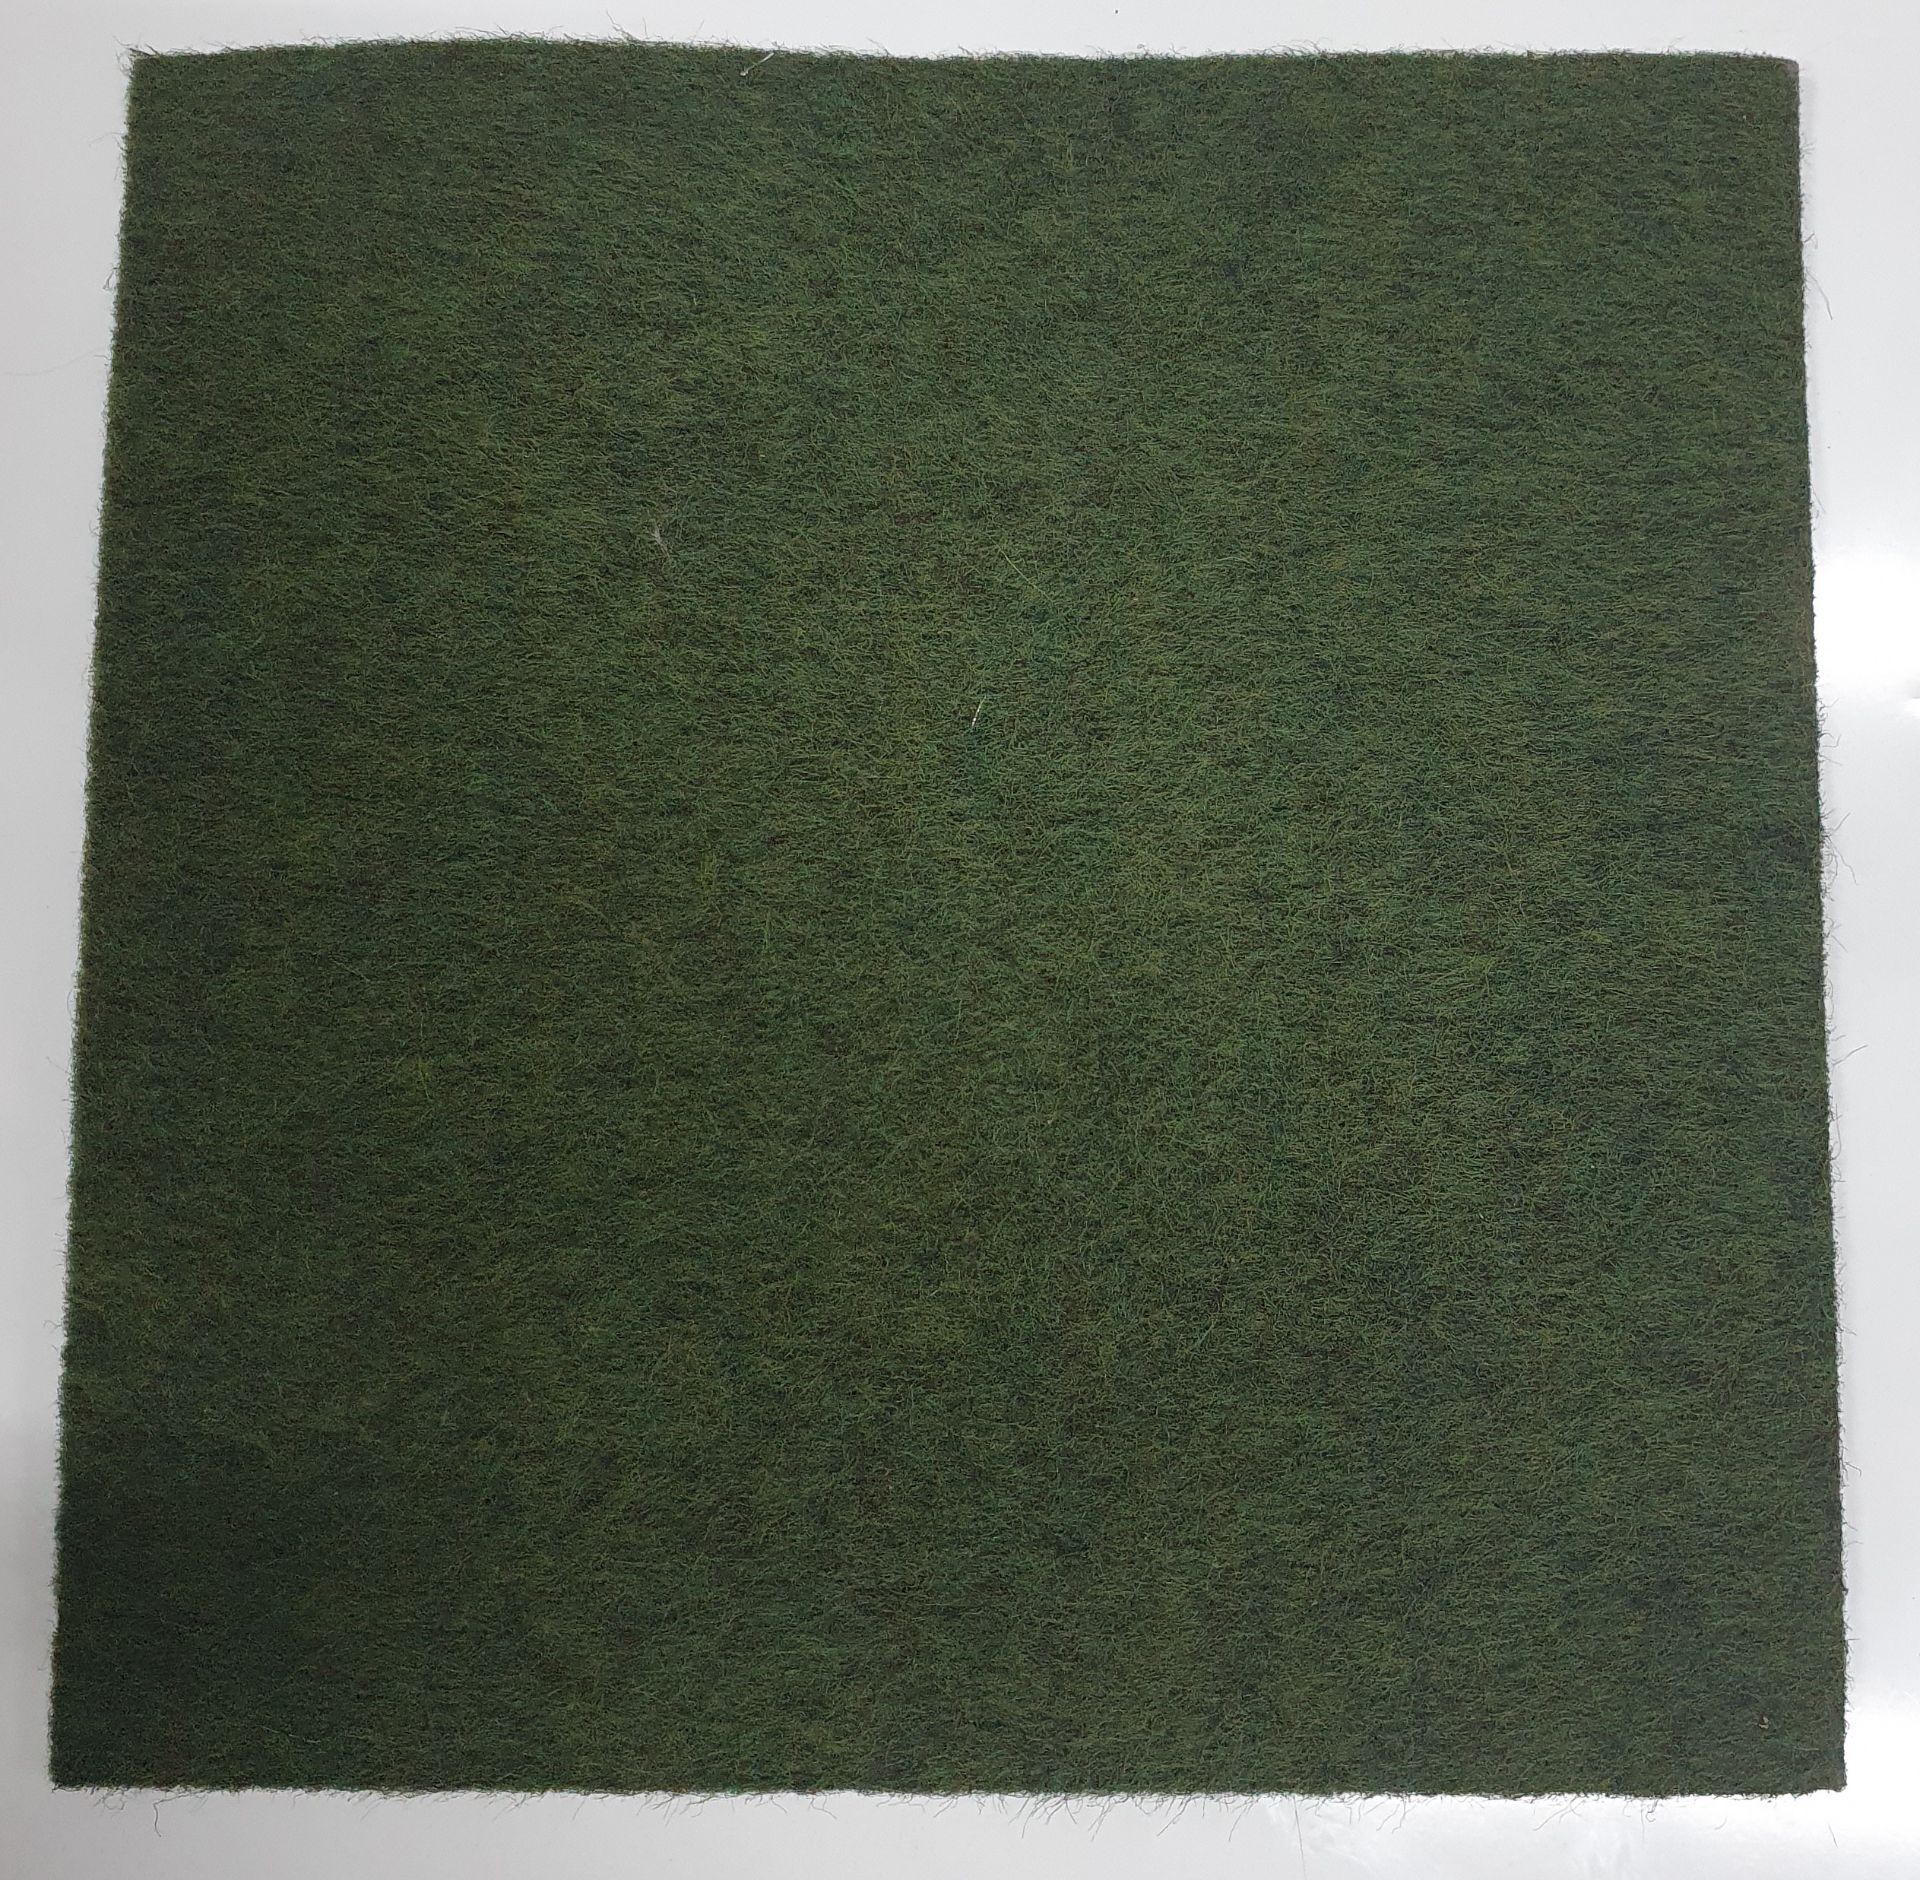 Approximatley 70 x Melville 50 x 50 Carpet Tiles - Image 2 of 2